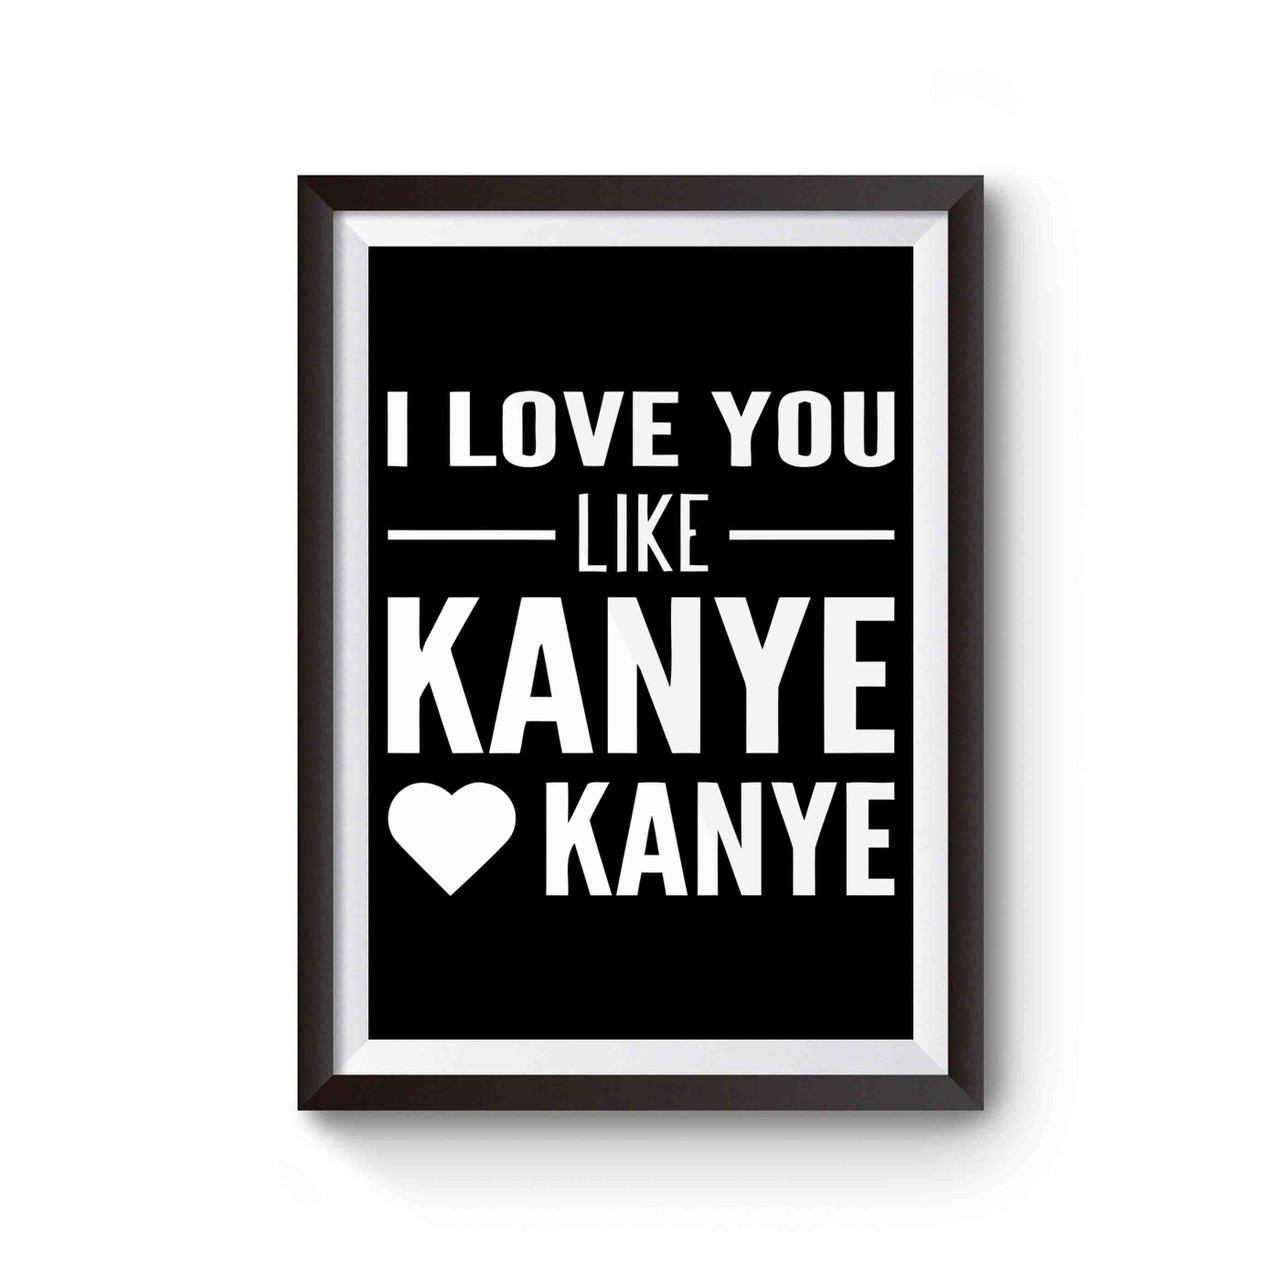 LV KANYE QUOTE POSTER